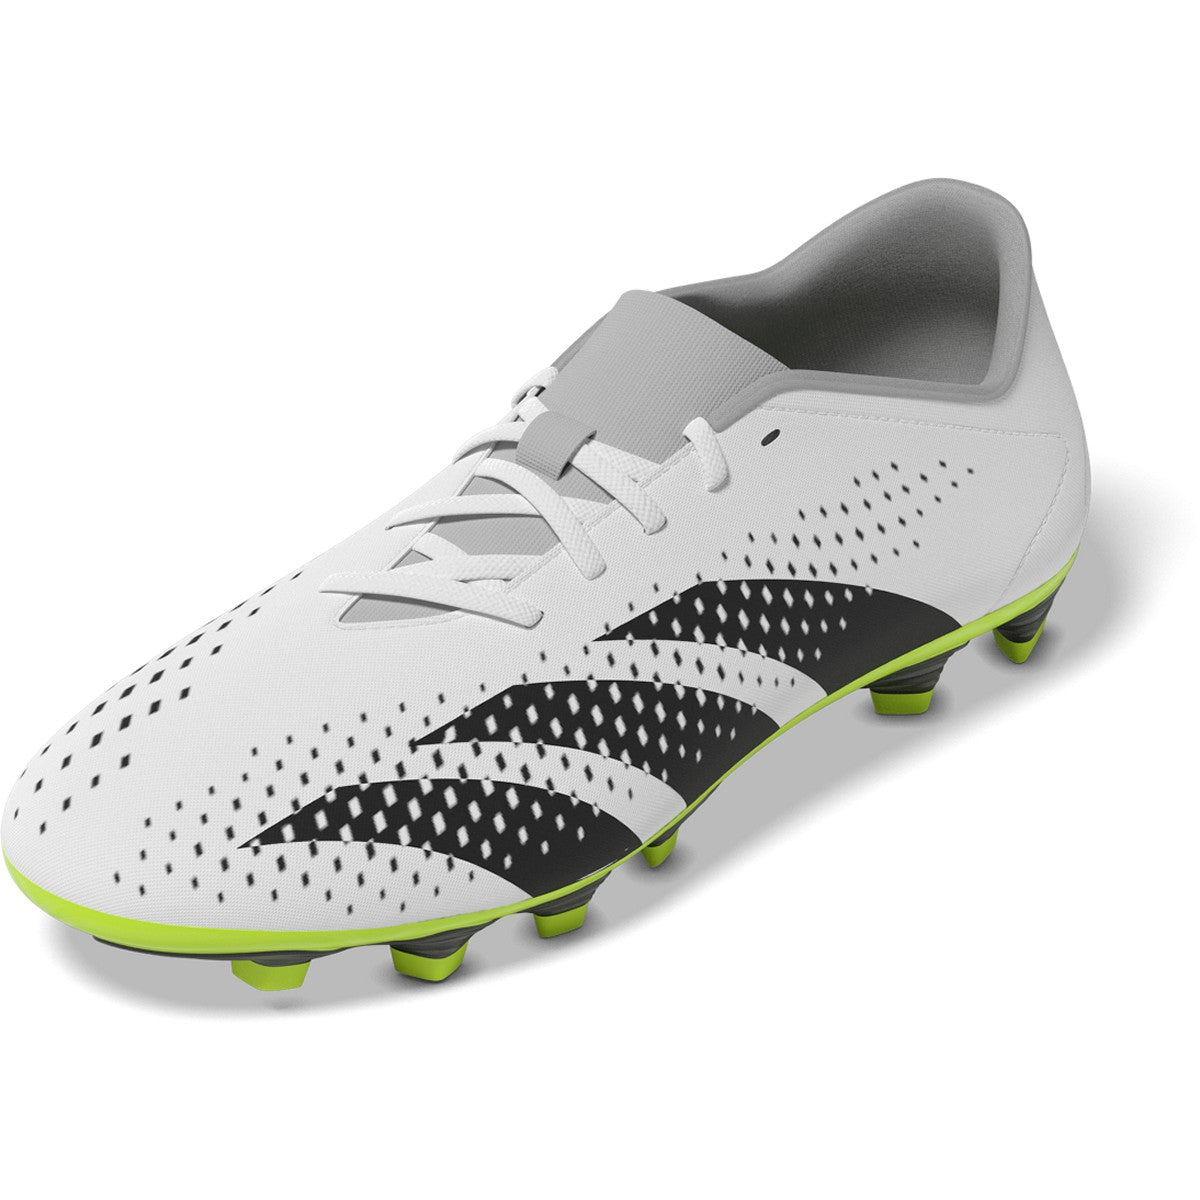 Soccer Whit Juniors – Soccer Predator IE9434 adidas FxG Zone Cloud Cleats Accuracy.4